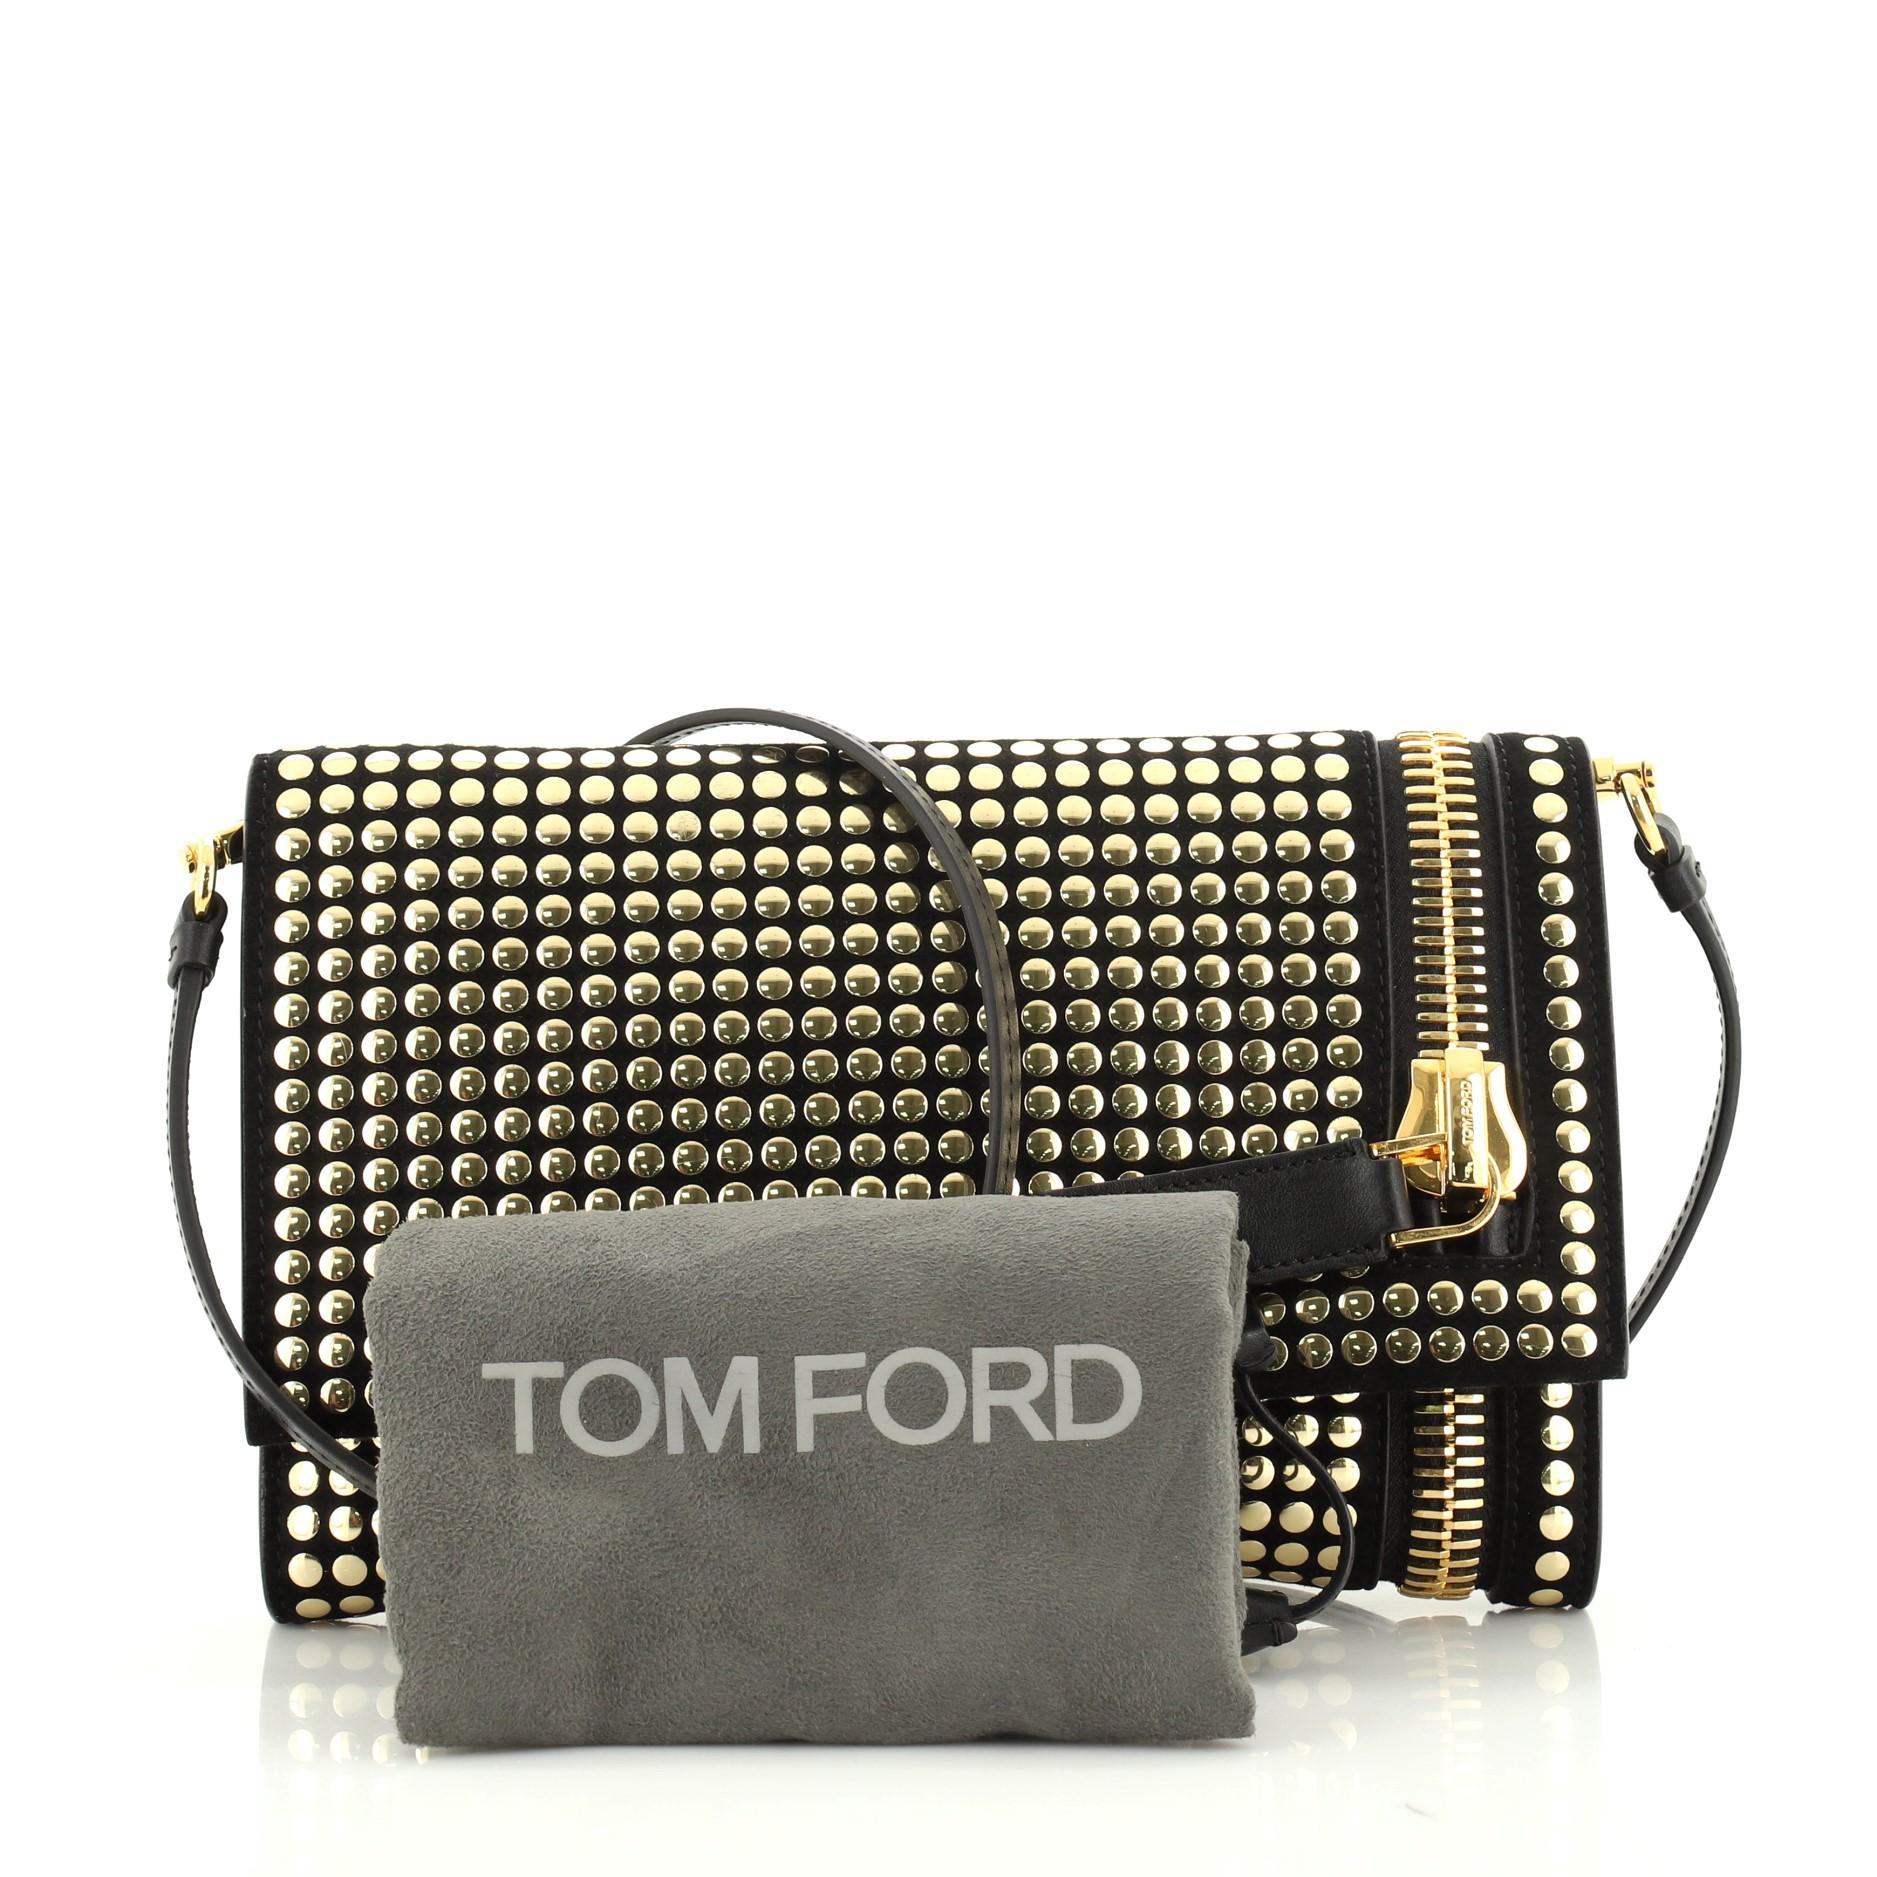 This Tom Ford Alix Fold Over Crossbody Bag Studded Leather Small, crafted from black studded leather, features adjustable leather strap, zipper detail at exterior side, stud embellishments, and gold-tone hardware. Its magnetic snap closure opens to